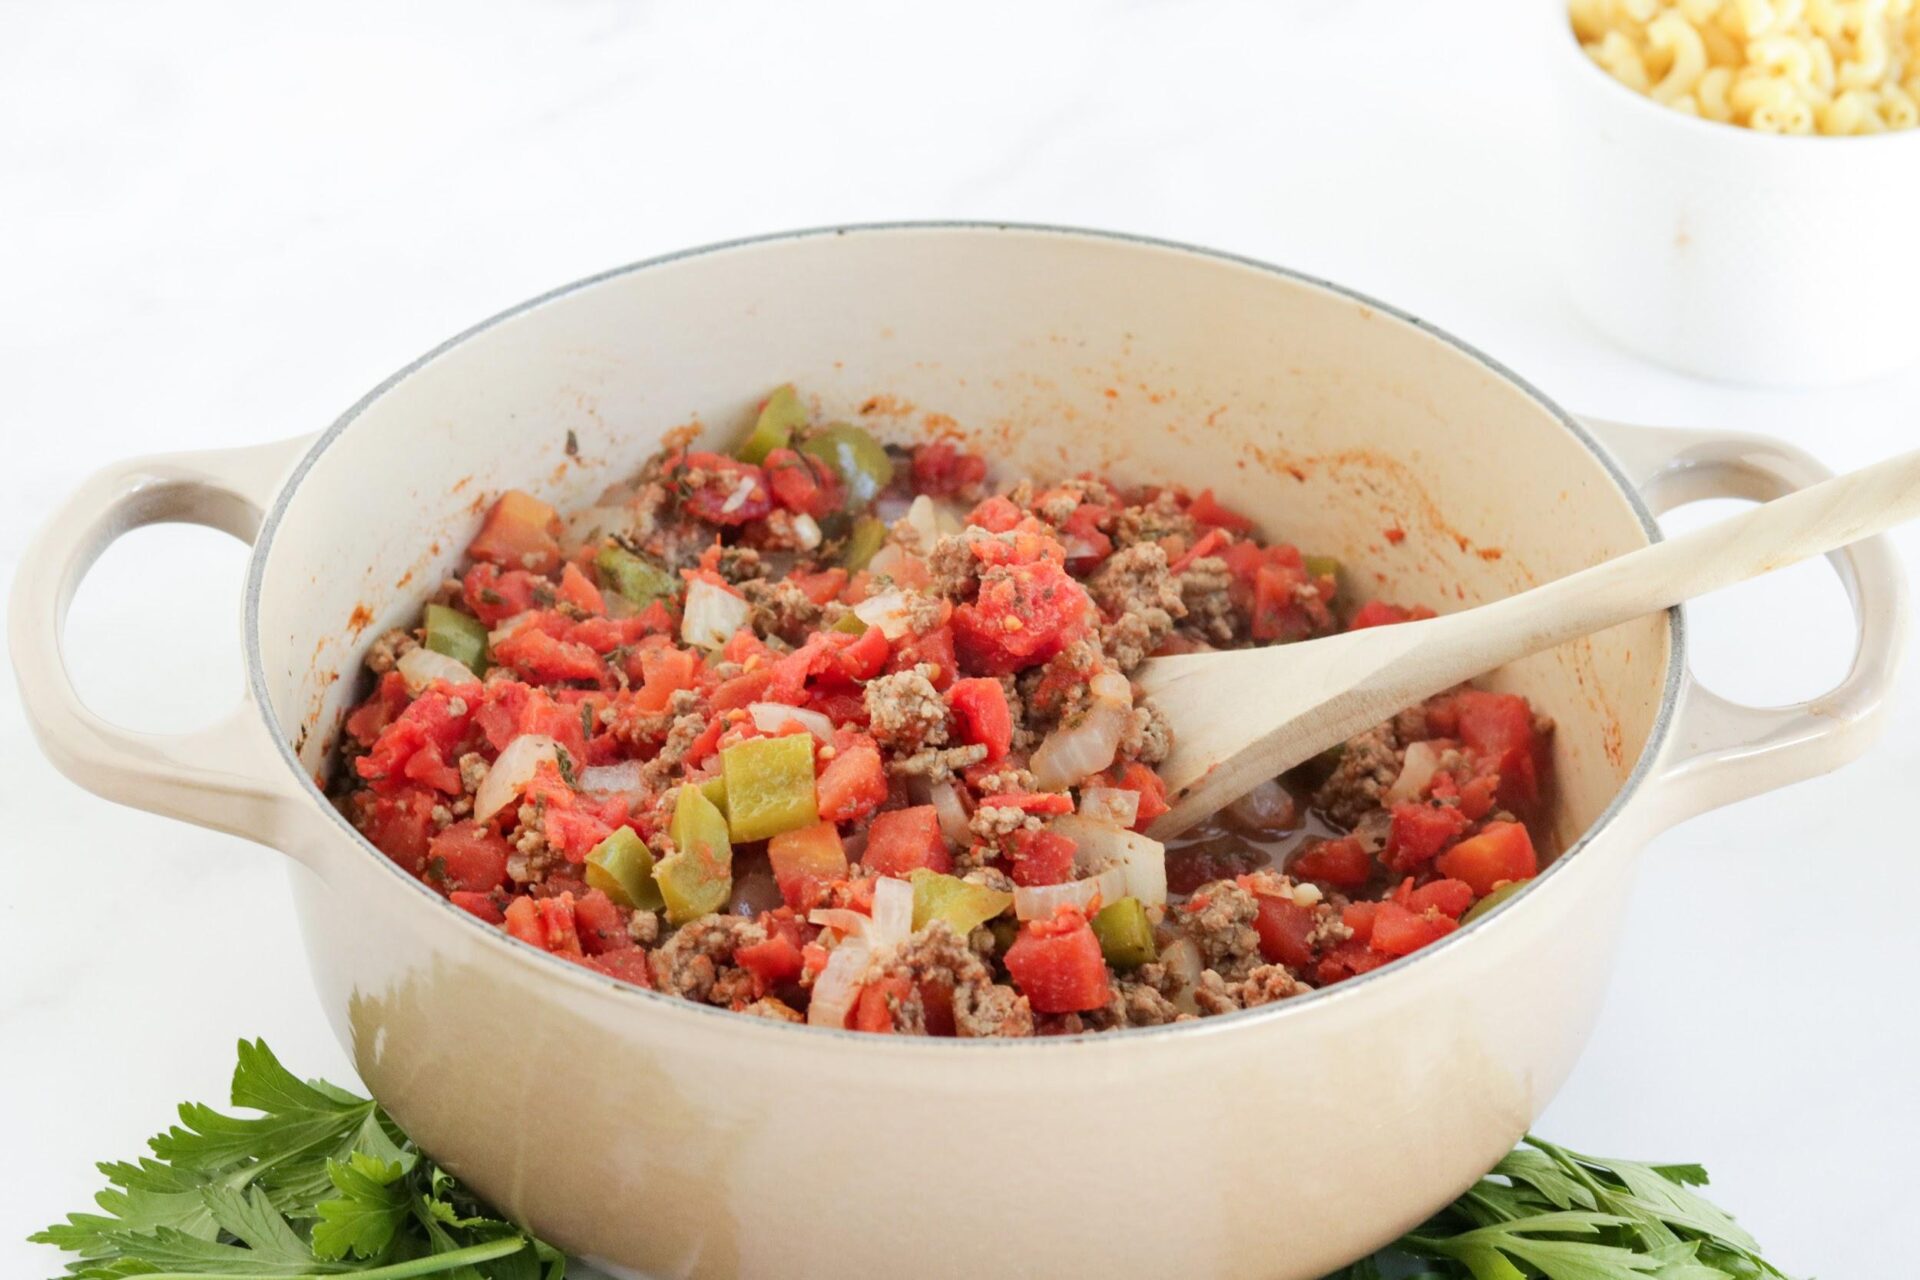 Are you looking for the perfect comfort food? Well, look no further because this American Chop Suey Recipe is the perfect meal for busy families!